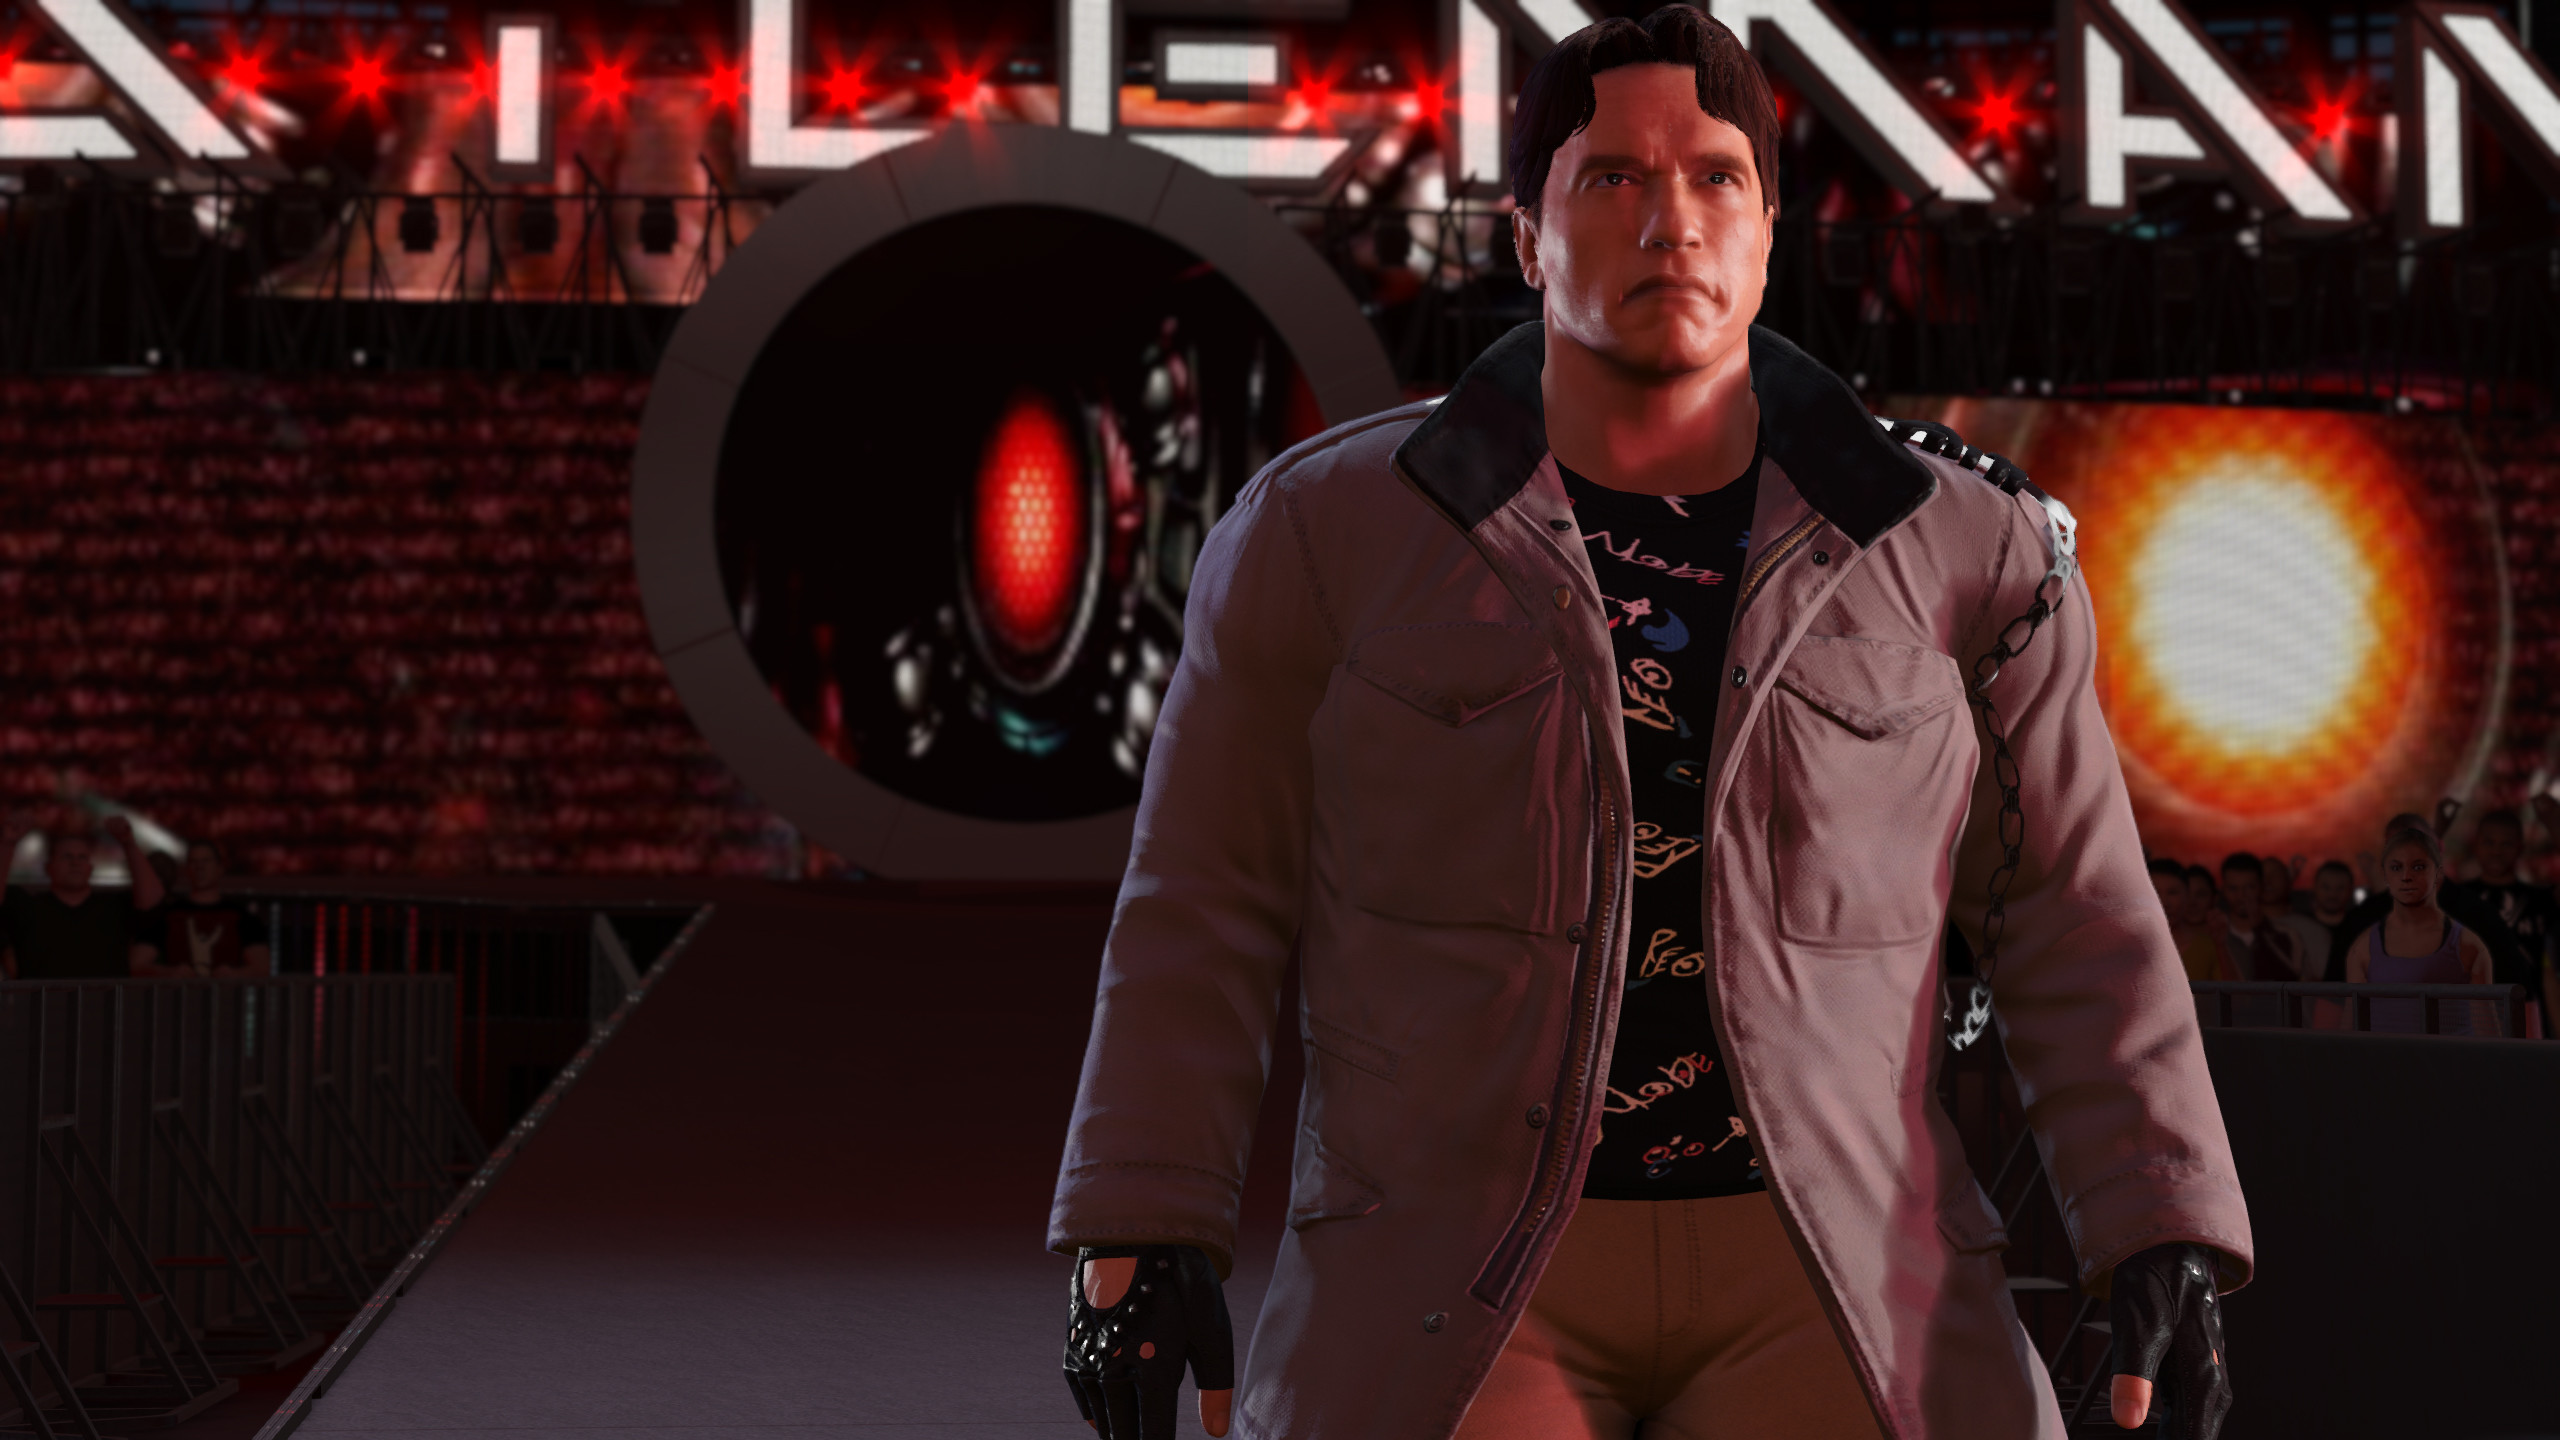 2560x1440 WWE 2K franchise has interesting, new additions for gamers. 2K sports  released the standalone